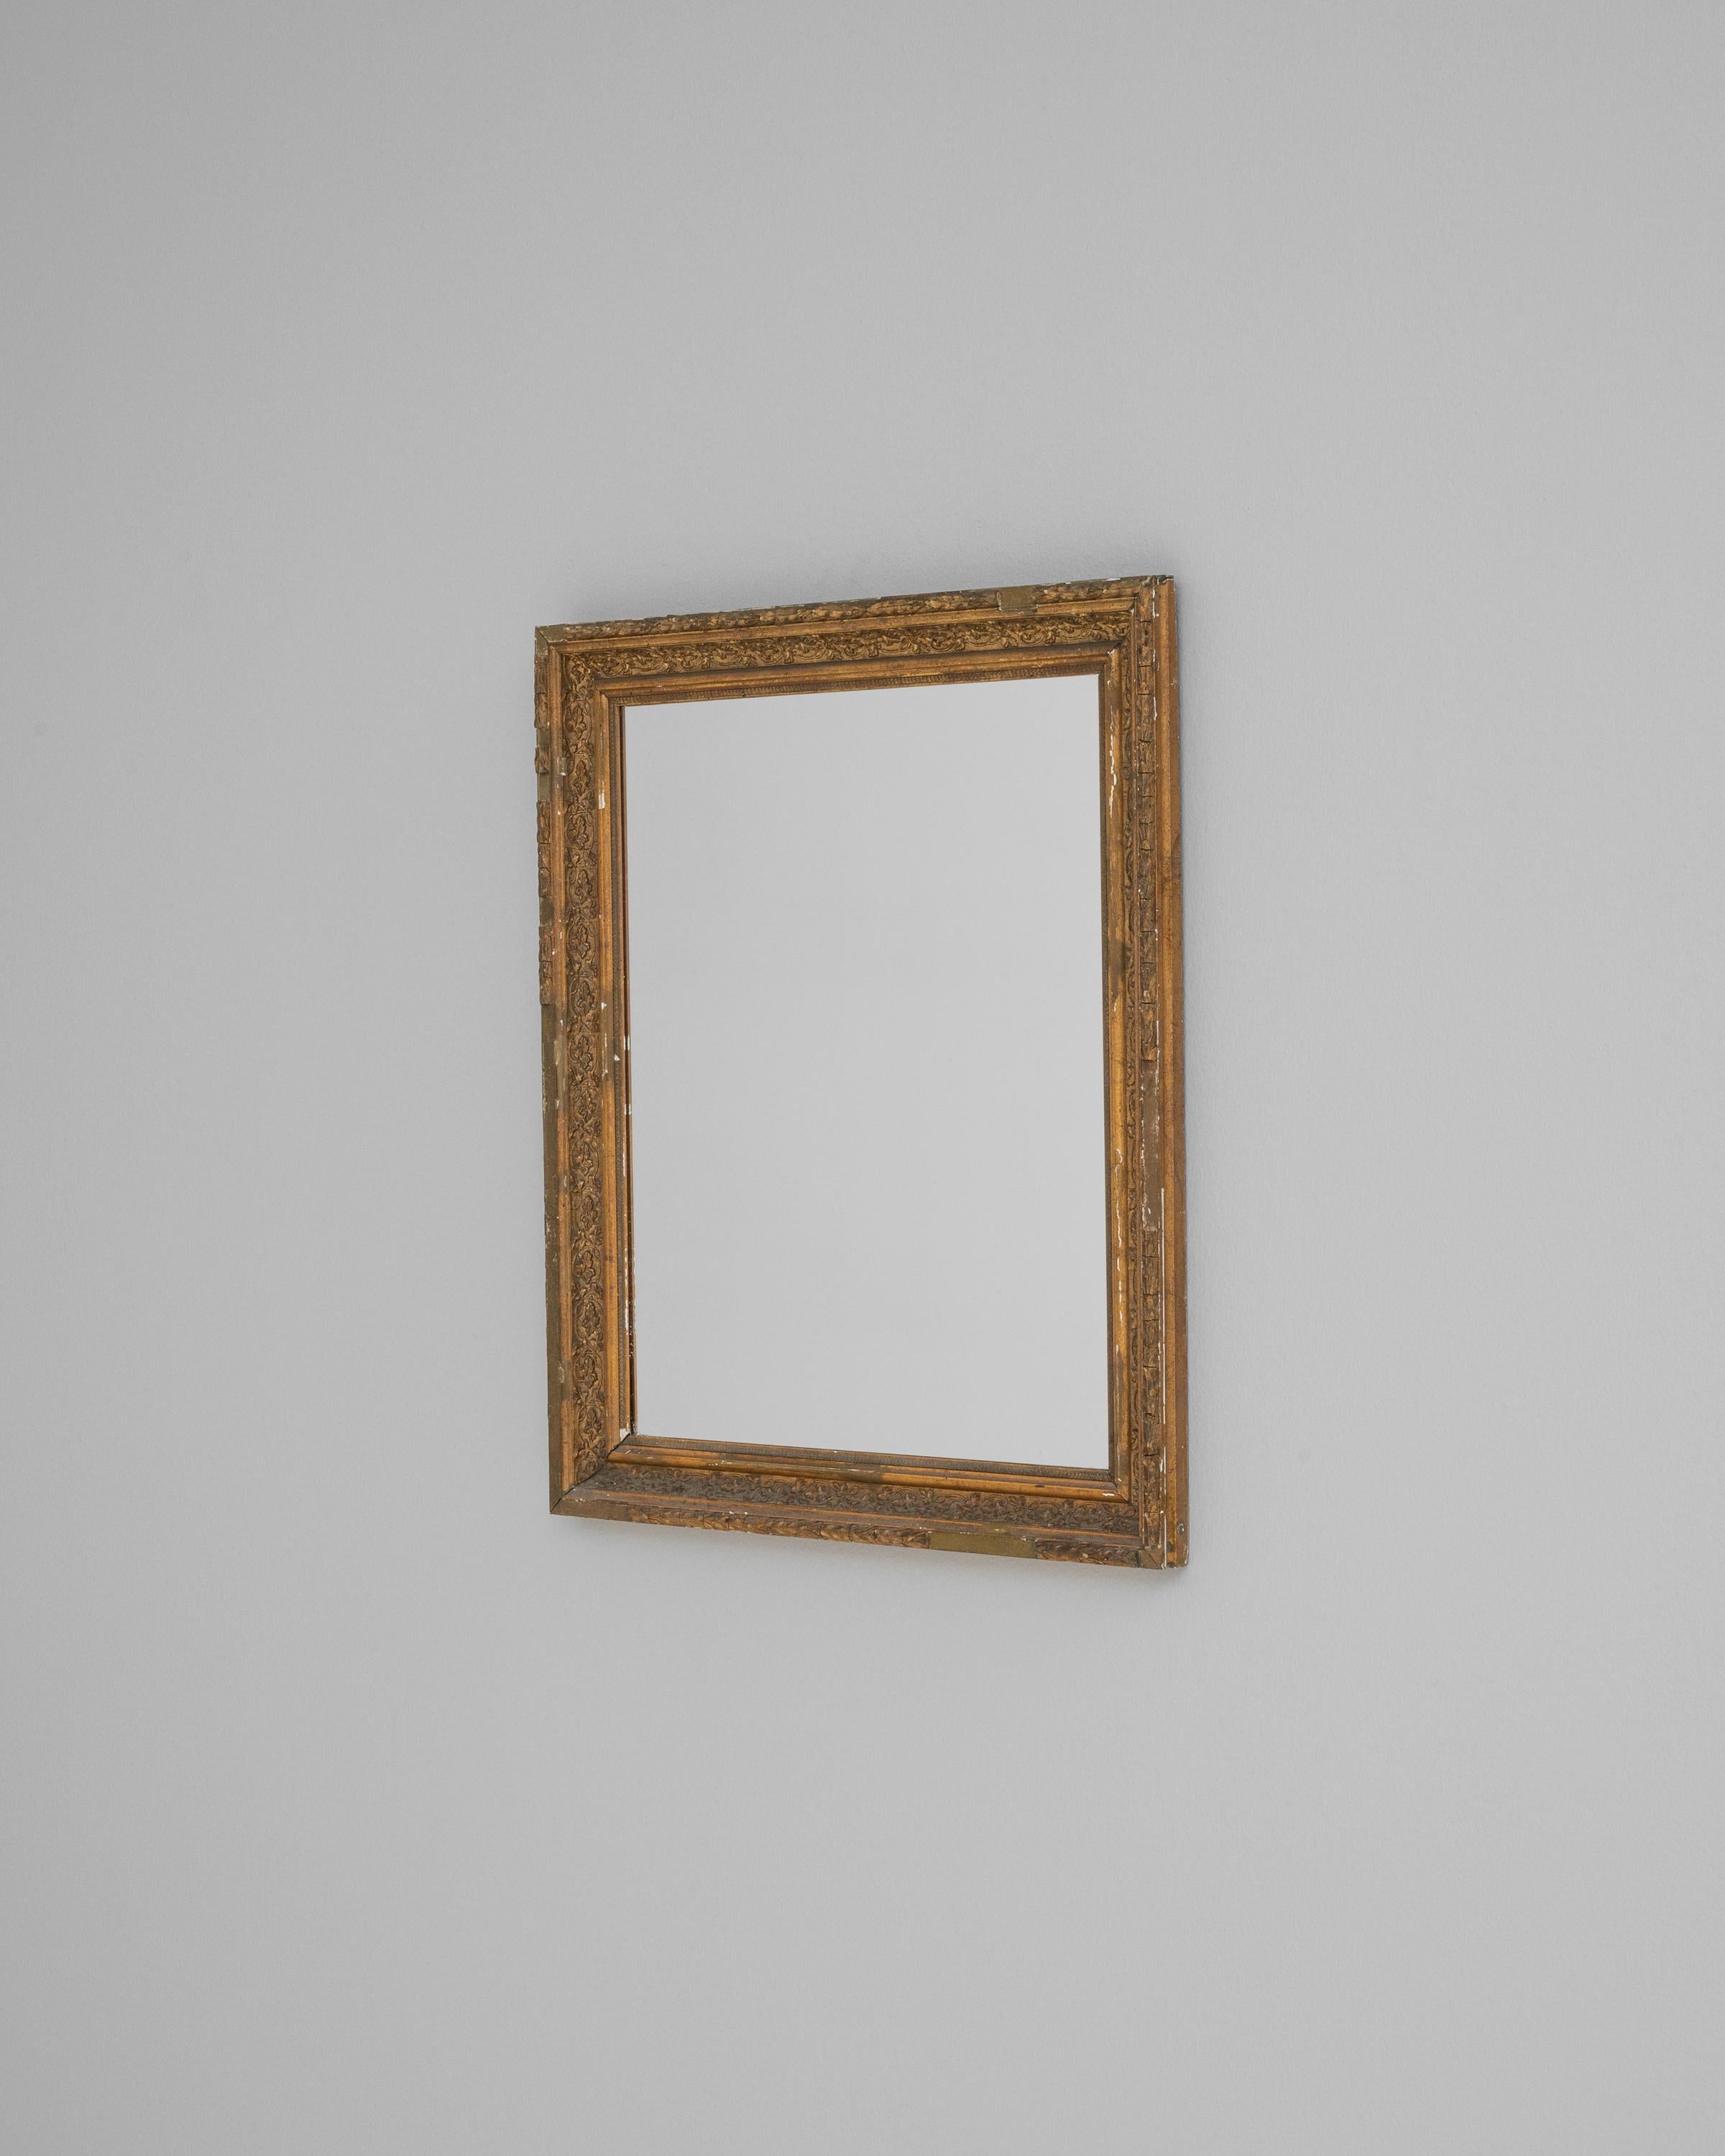 Discover the allure of vintage charm with this 20th Century French Wooden Mirror, a piece that beautifully marries function and form. The mirror is framed in meticulously carved wood, with a distressed gold finish that highlights the intricate